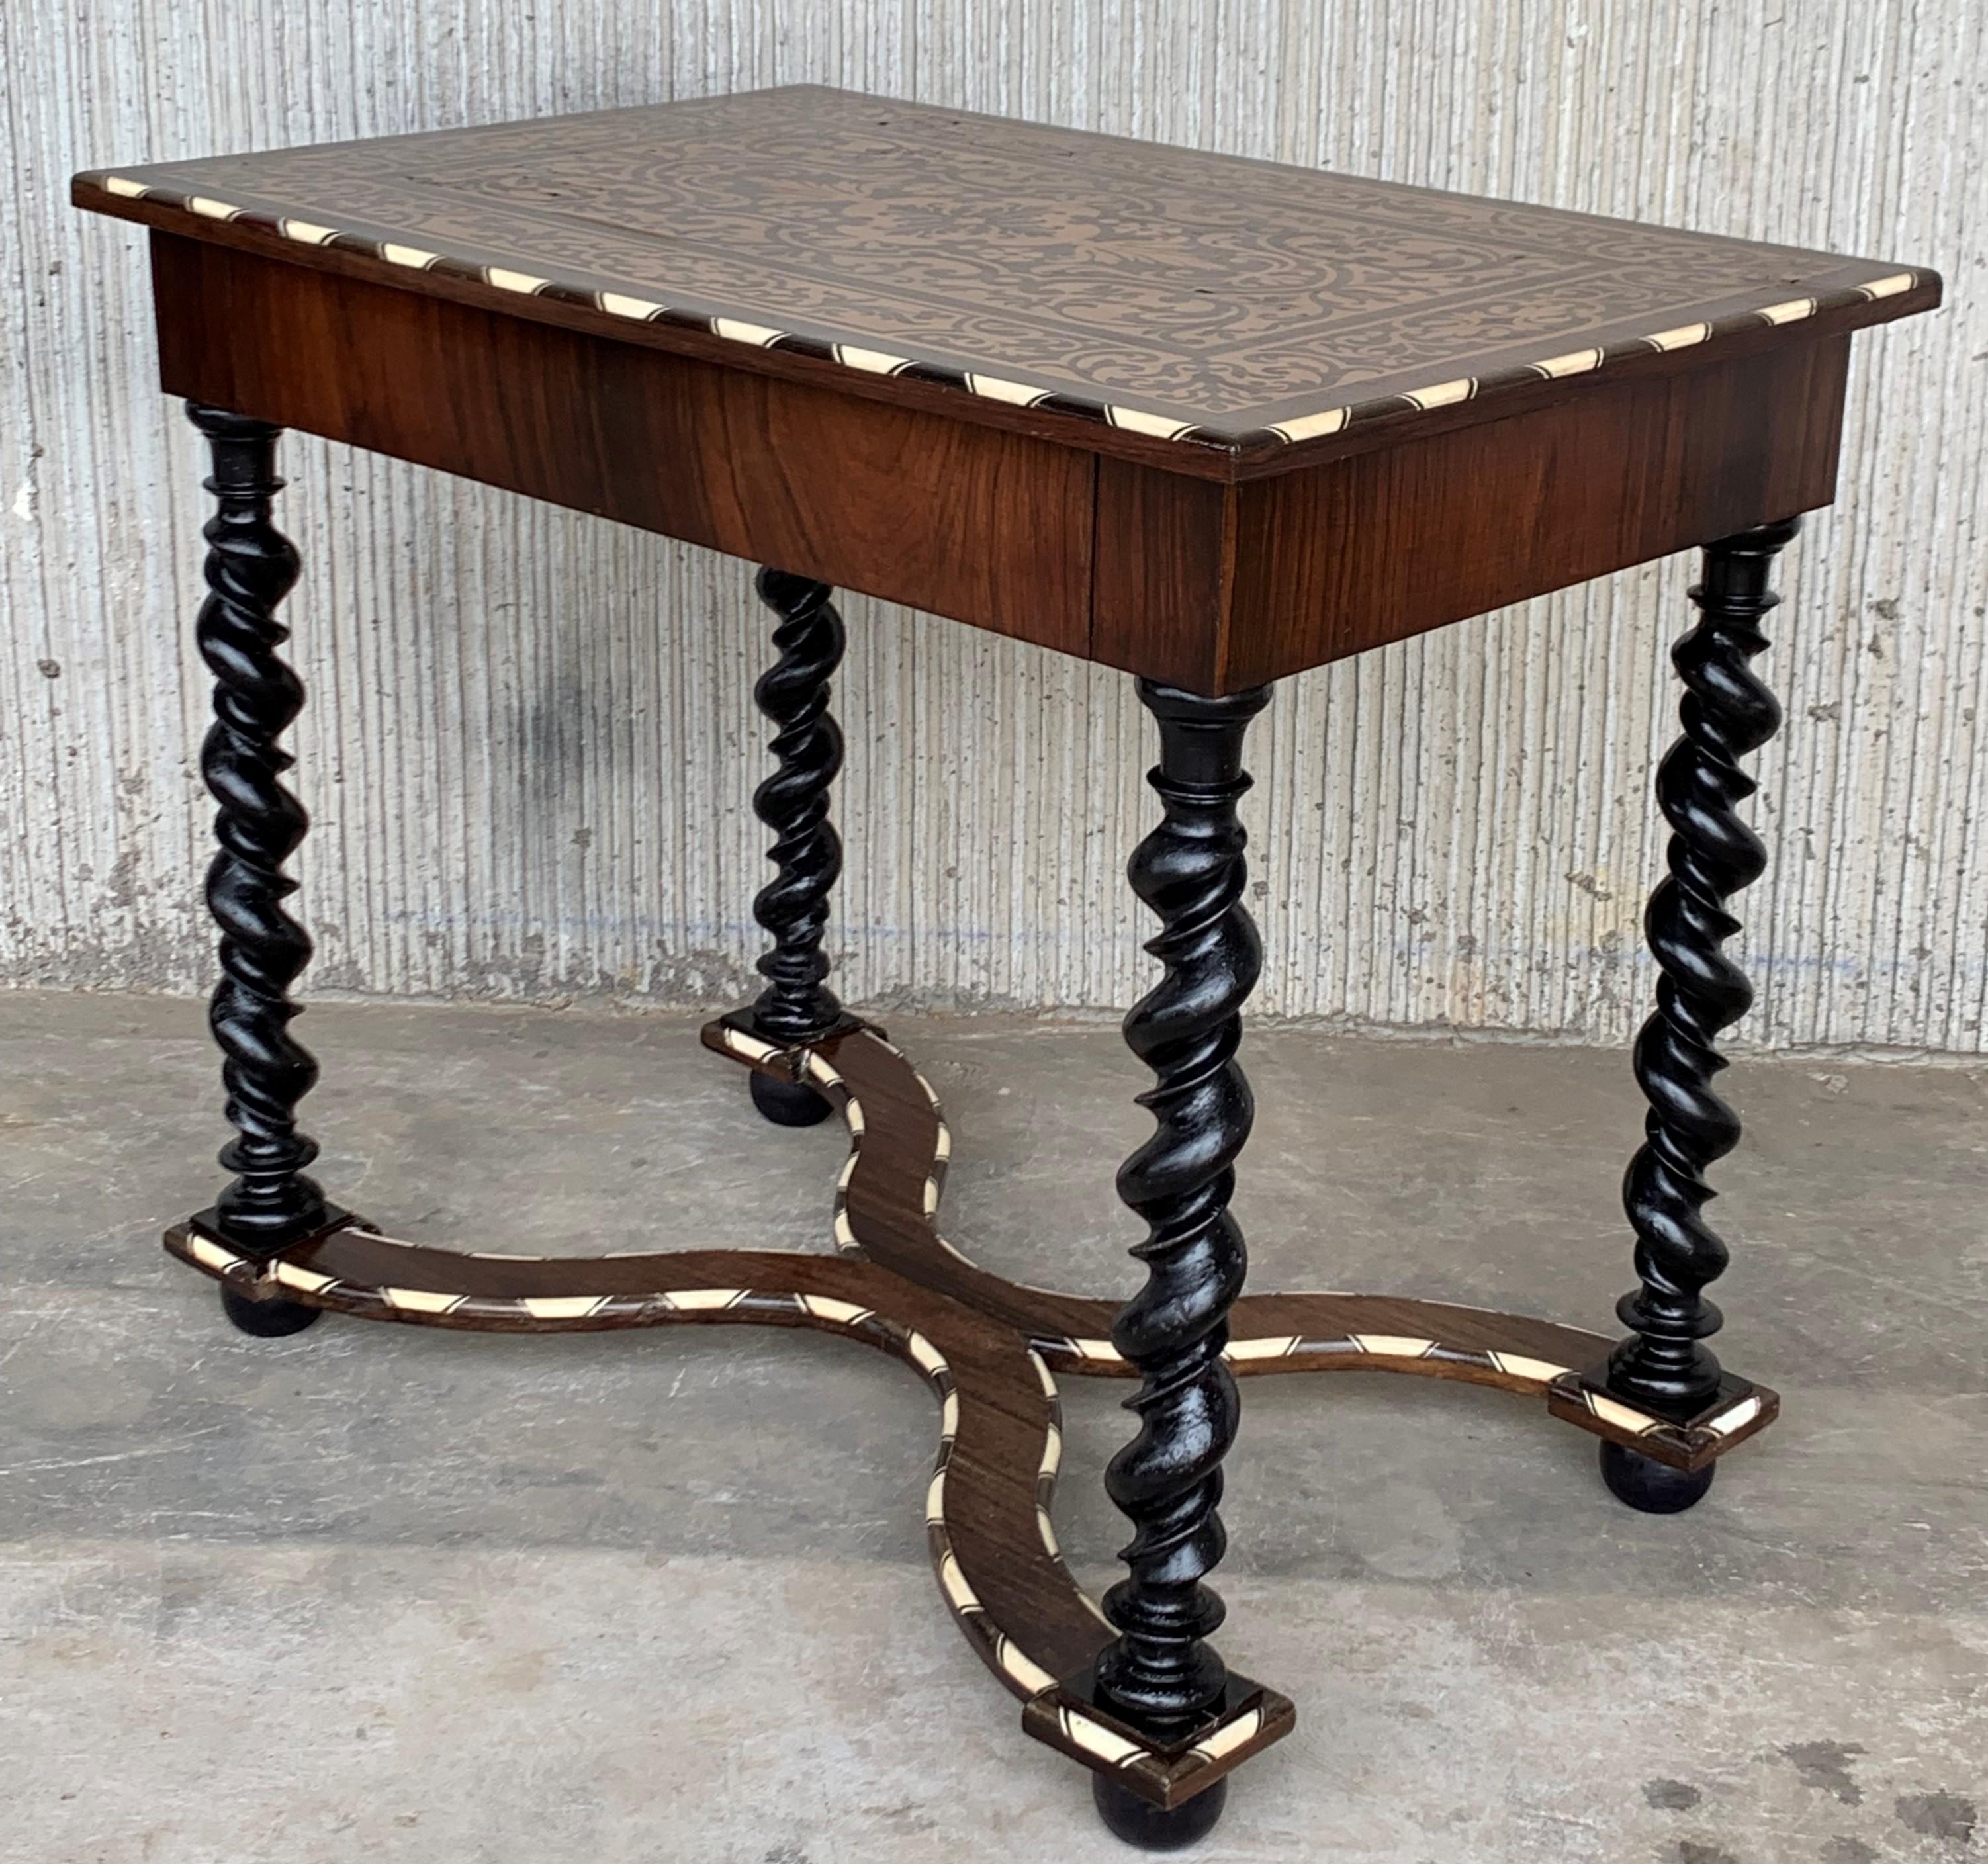 19th Century 18th Century William and Mary Marquetry Side Table with Turned Legs & Stretcher